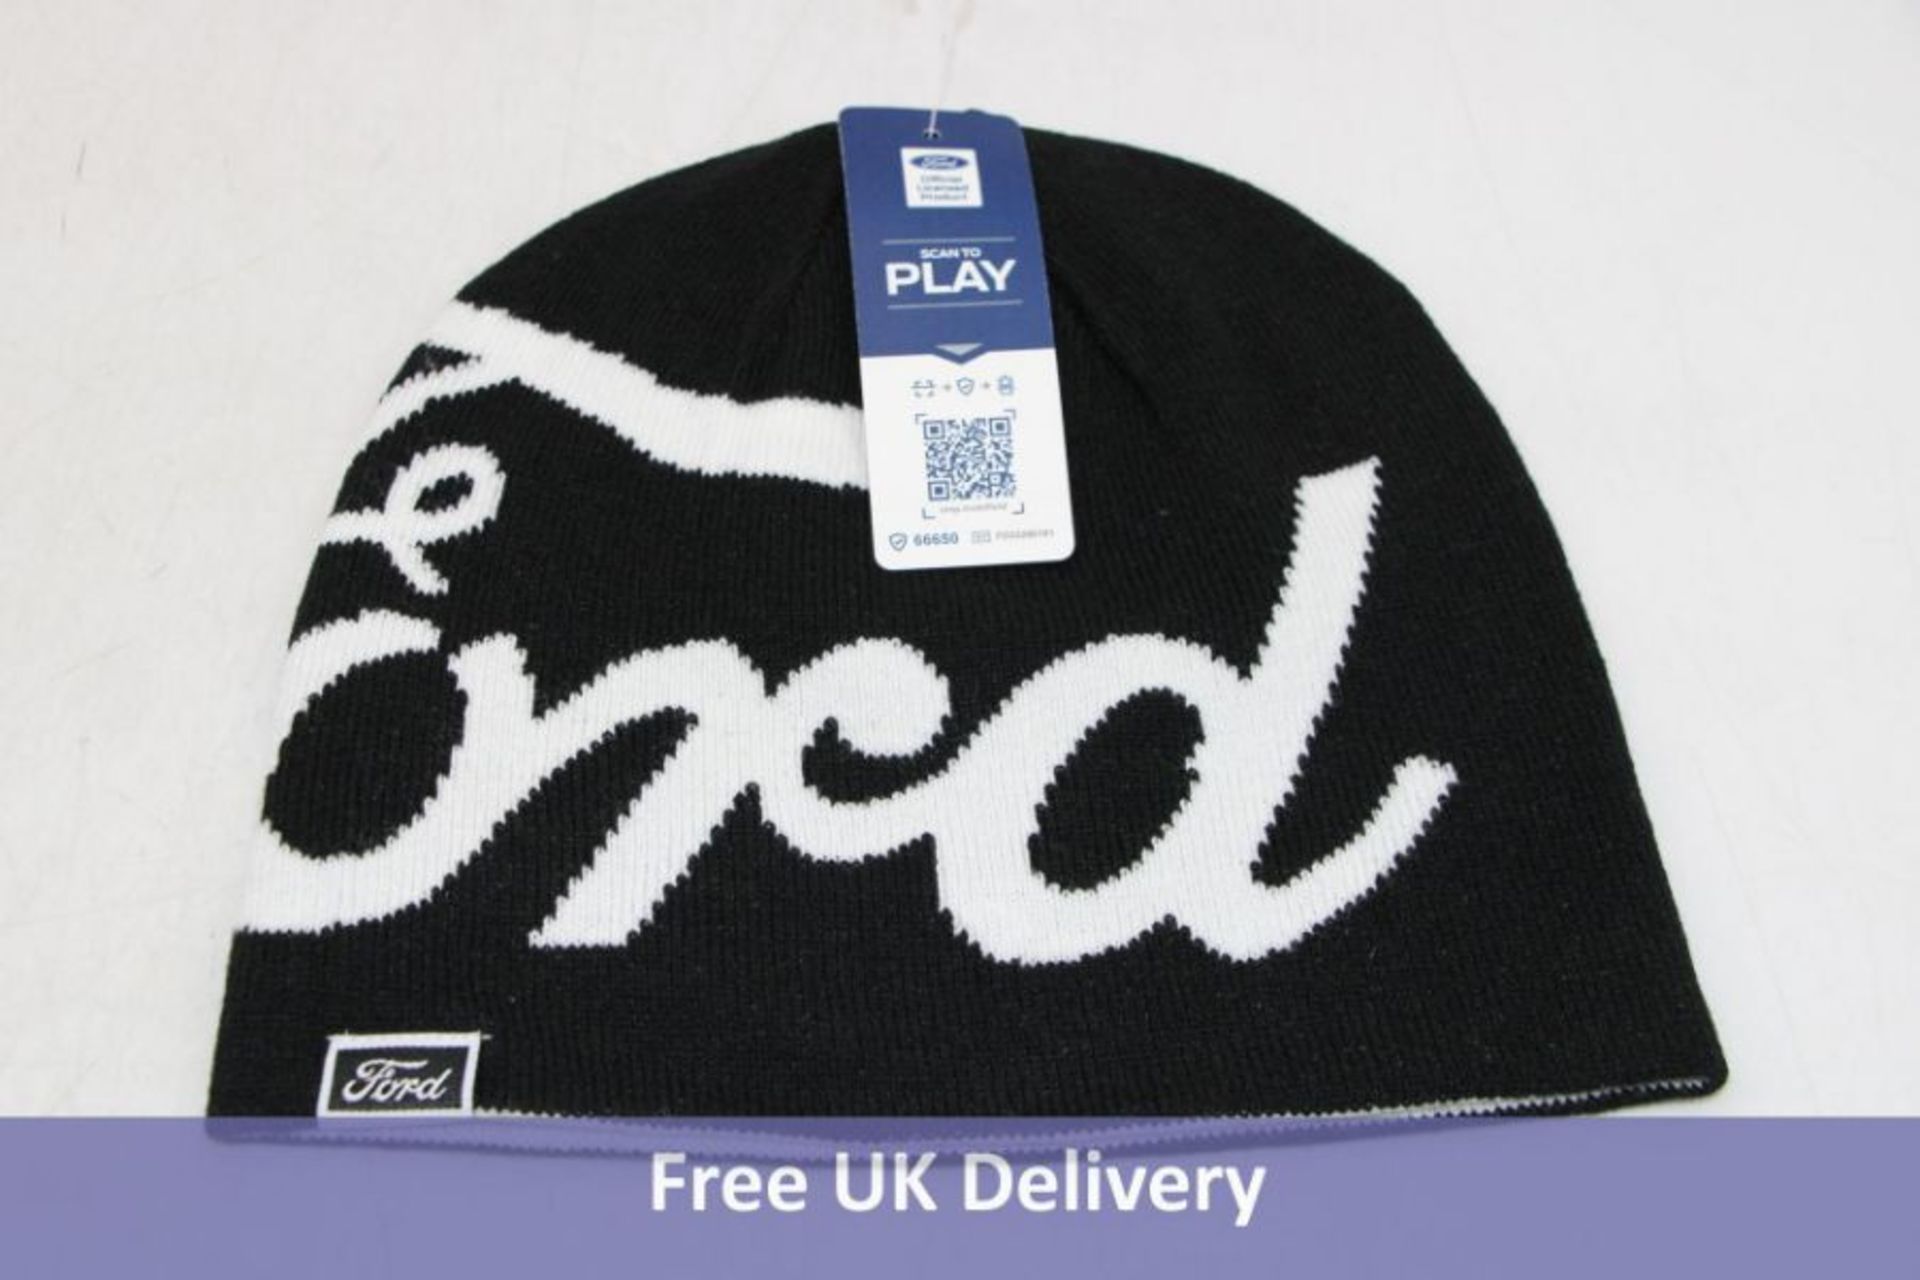 Five Ford Contrast Logo Beanie Hat, Black/White, One Size